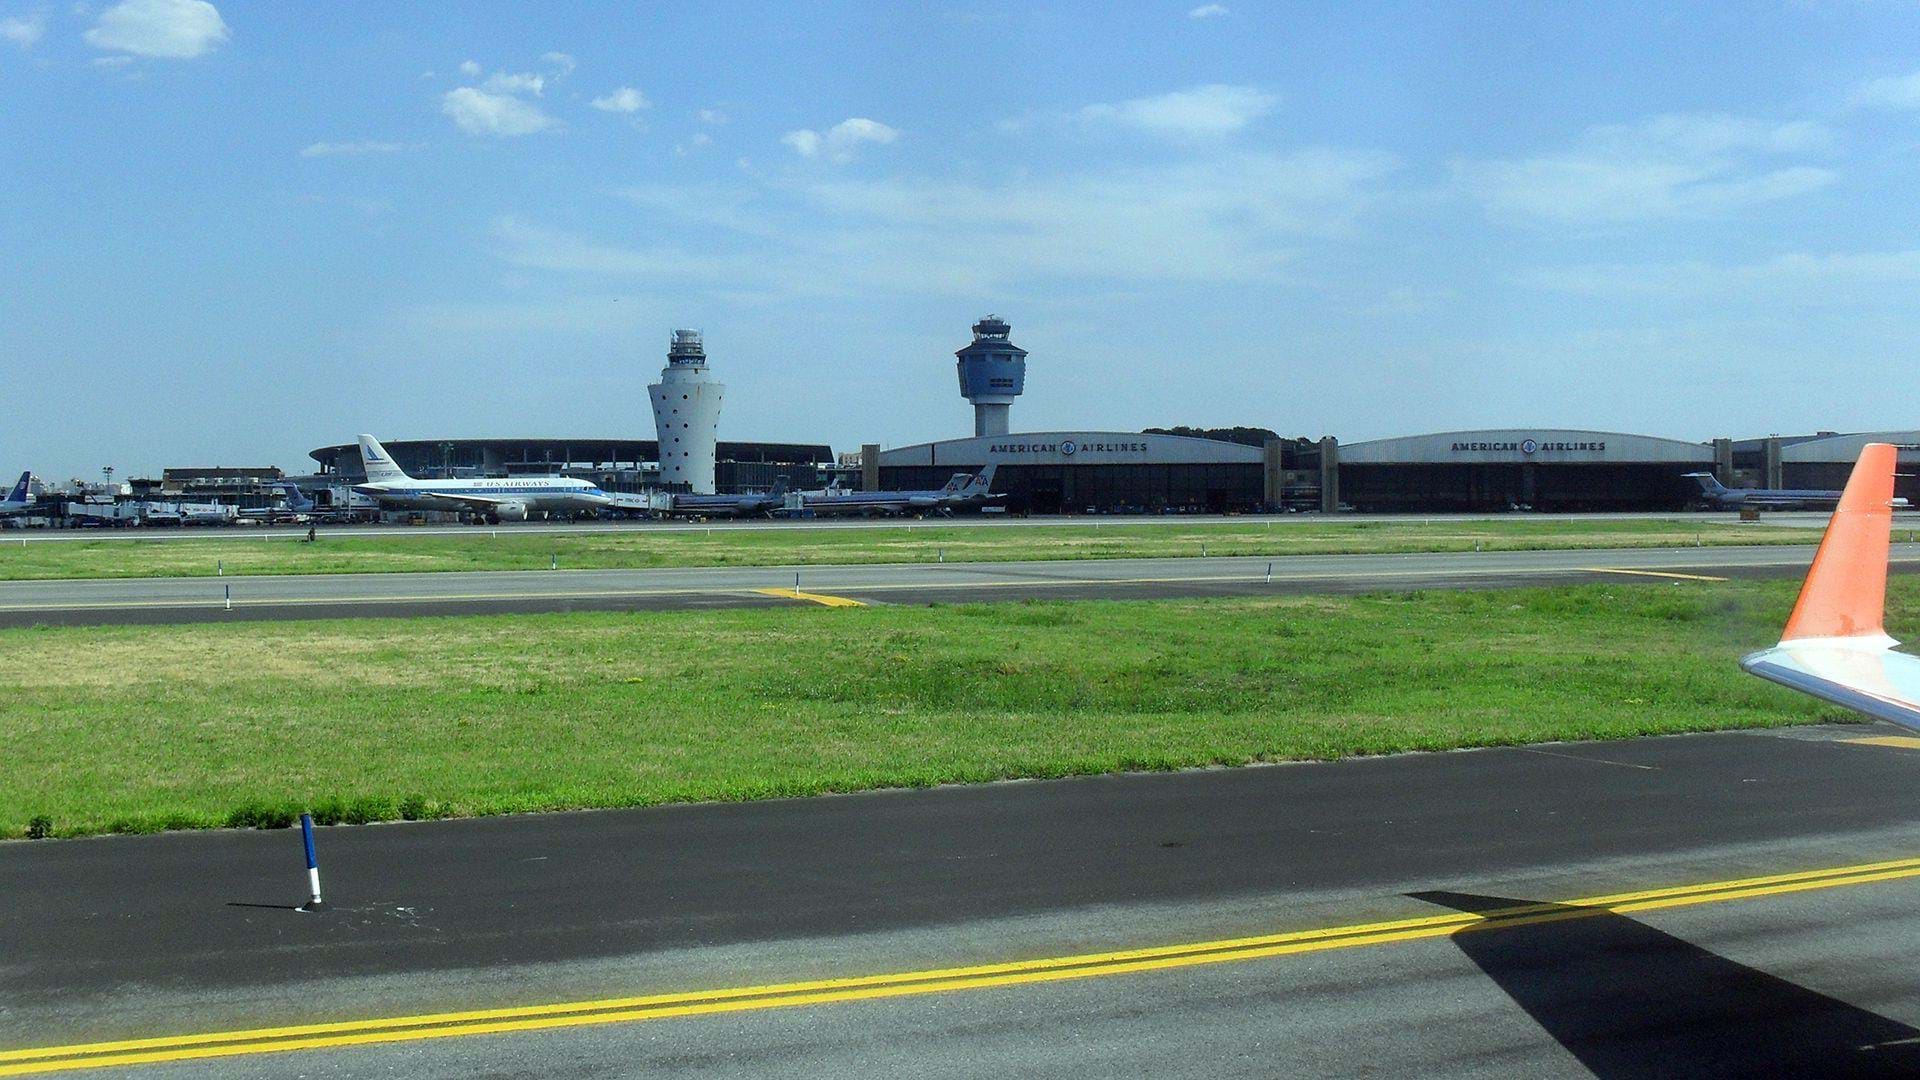 KLGA - old (left) and new (right) control towers